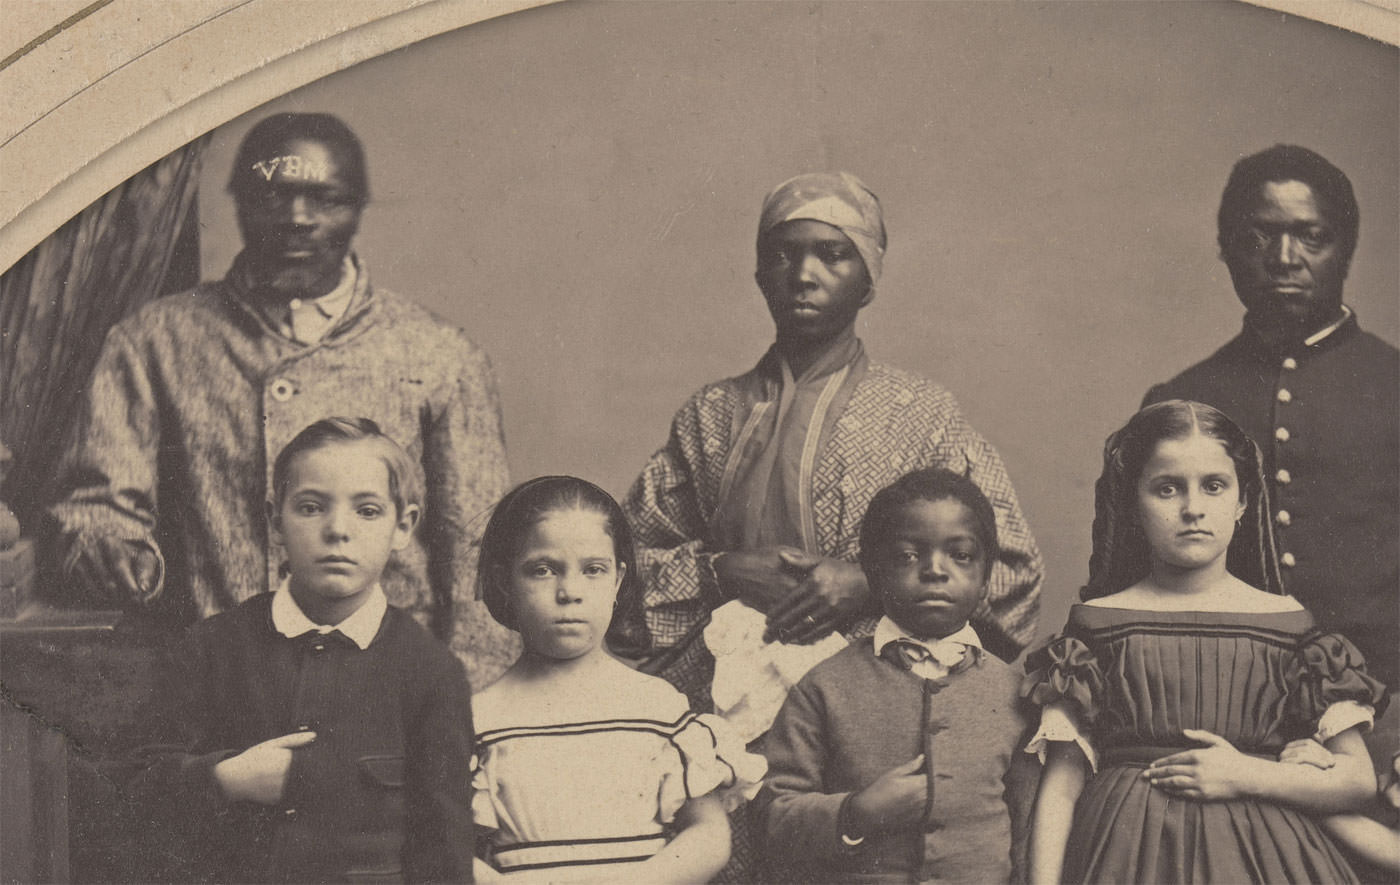 Former slaves from Louisiana pose with school children of a school created by the man who freed them, Colonel George H. Banks, in New York, US in 1863.